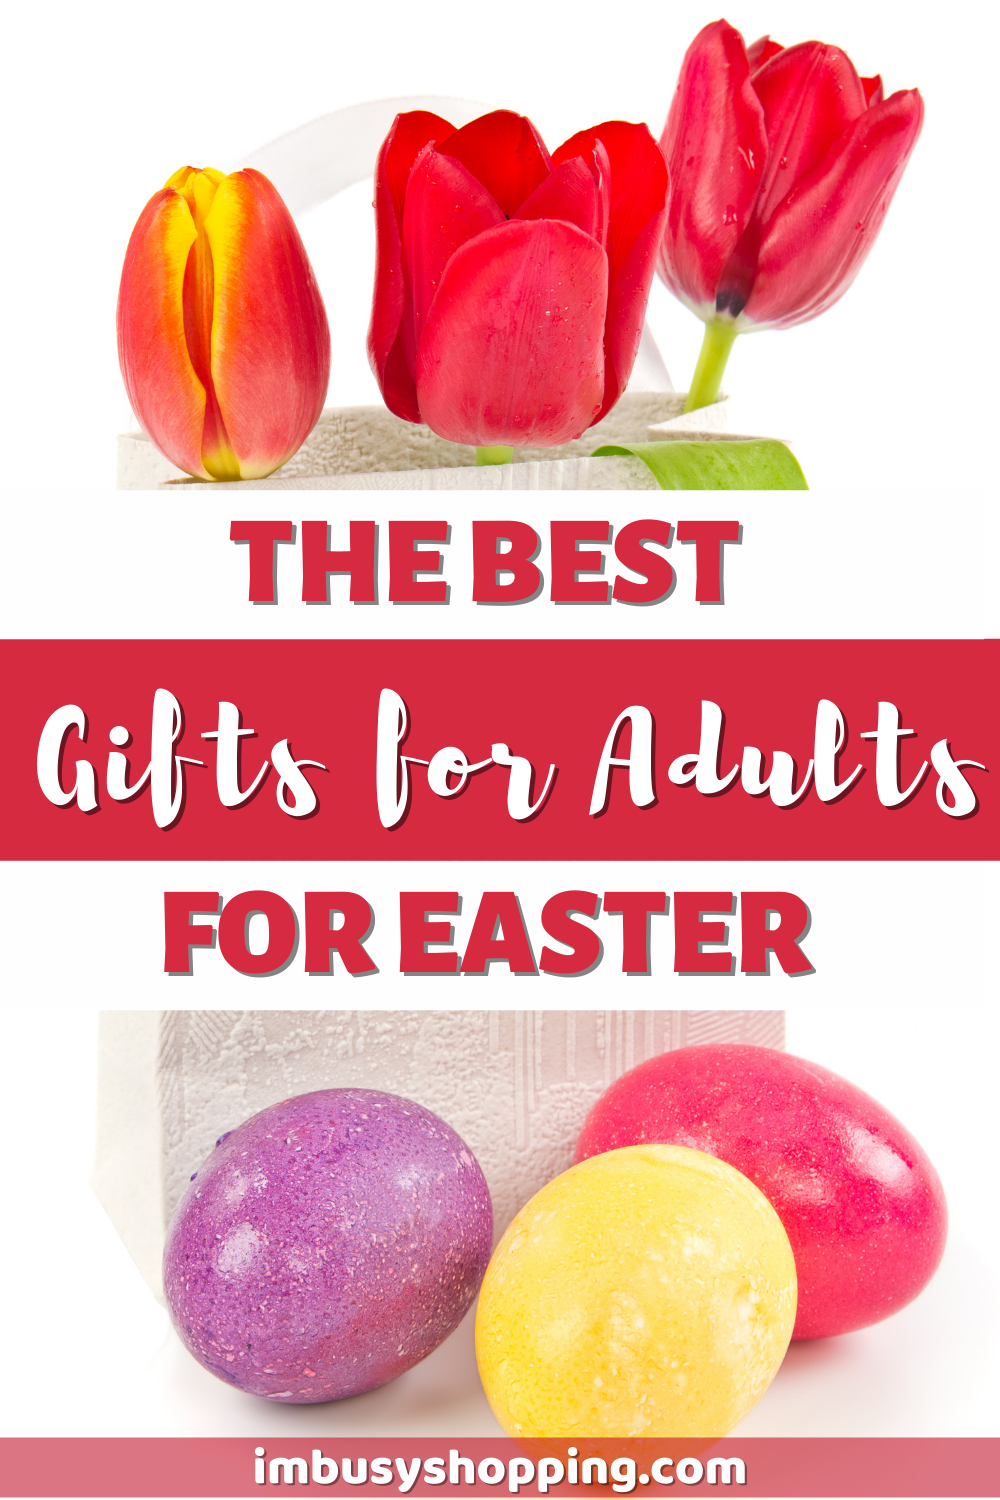 Pin showing The Best Gifts fir Adults for Easter